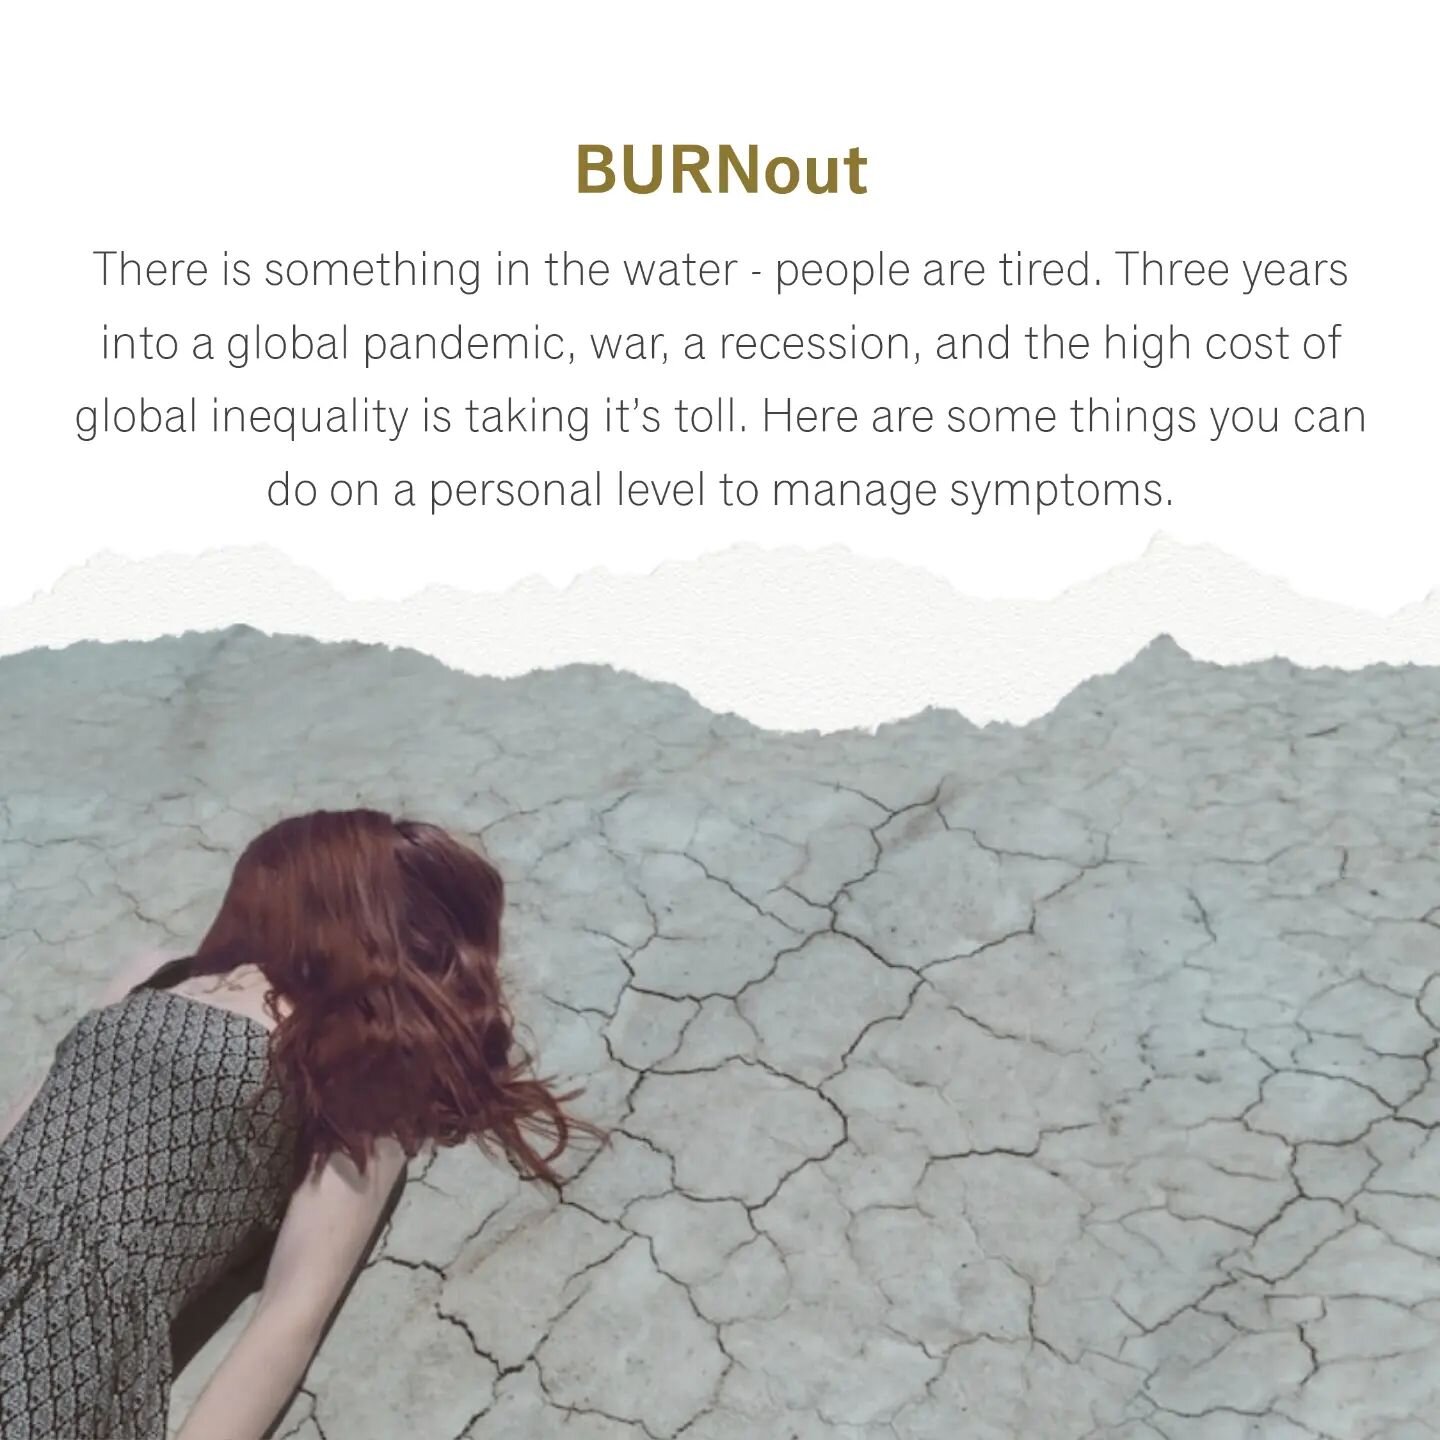 It's not just you, it's a lot of people right now. Burnout is a natural but undesirable symptom of long periods of stress without proper rest and management of symptoms. Here are some tips to take care of yourself in this time.

#burnout #burnoutreco